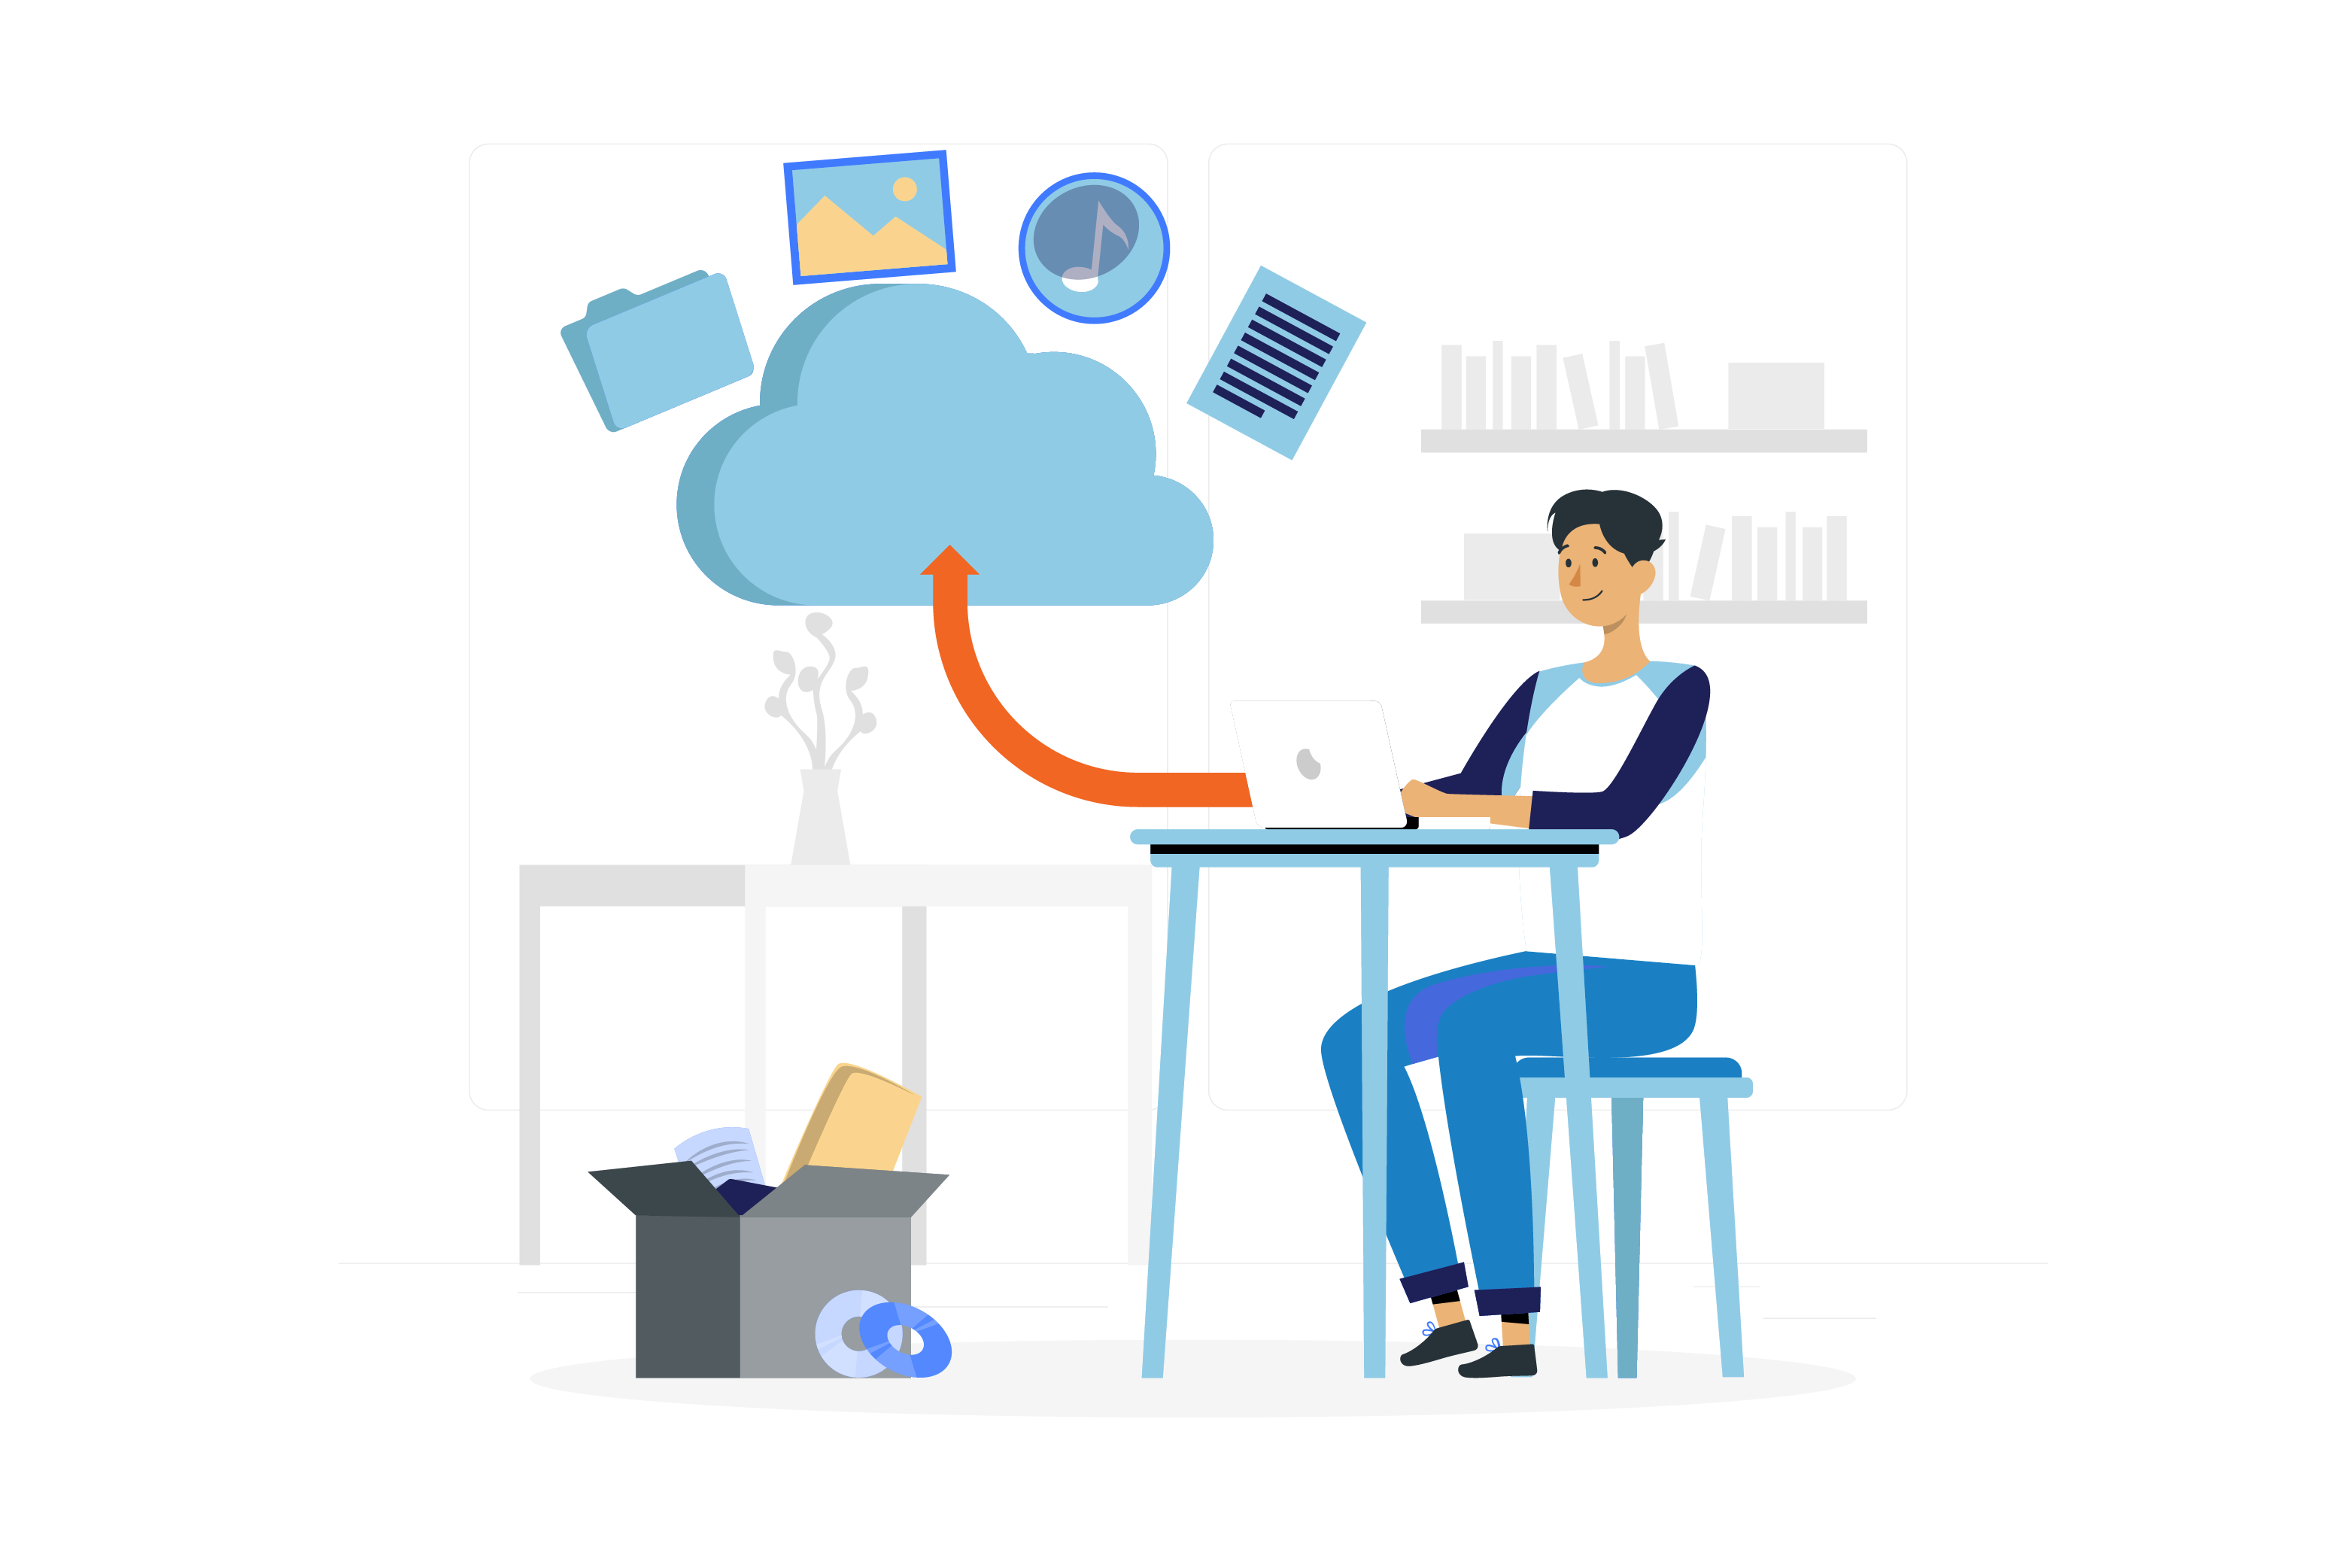 a person sits at a table and works on his laptop. There is a cloud next to him, which represents the storage of all data in a cloud to save the volume of his data